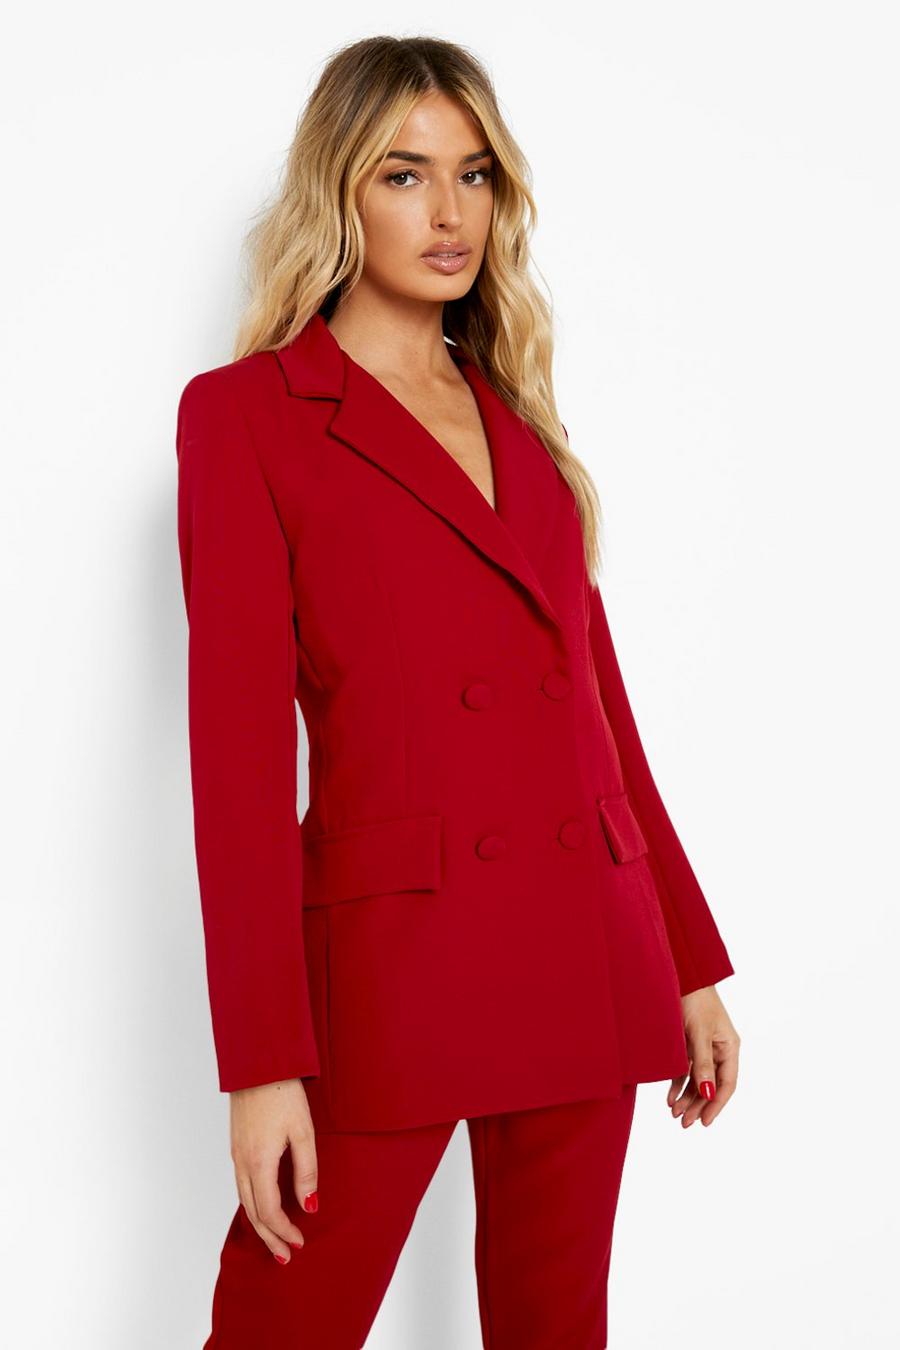 Boohoo Women Clothing Jackets Blazers 4 Womens Double Breasted Tailored Blazer 